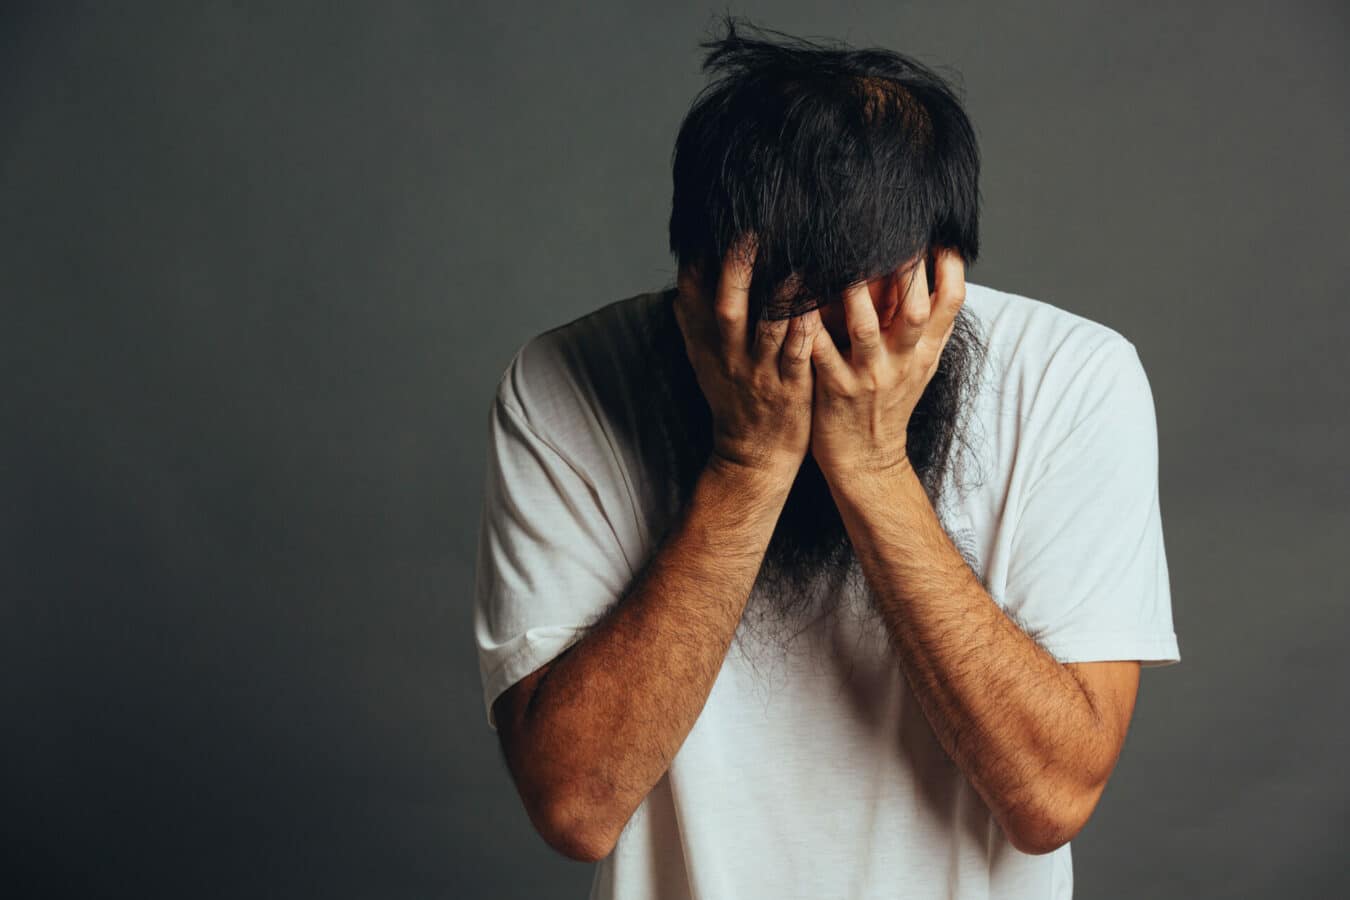 Exhibitionistic disorder can cause feelings of guilt in individuals, particularly if it violates social norms or laws and causes harm to others.